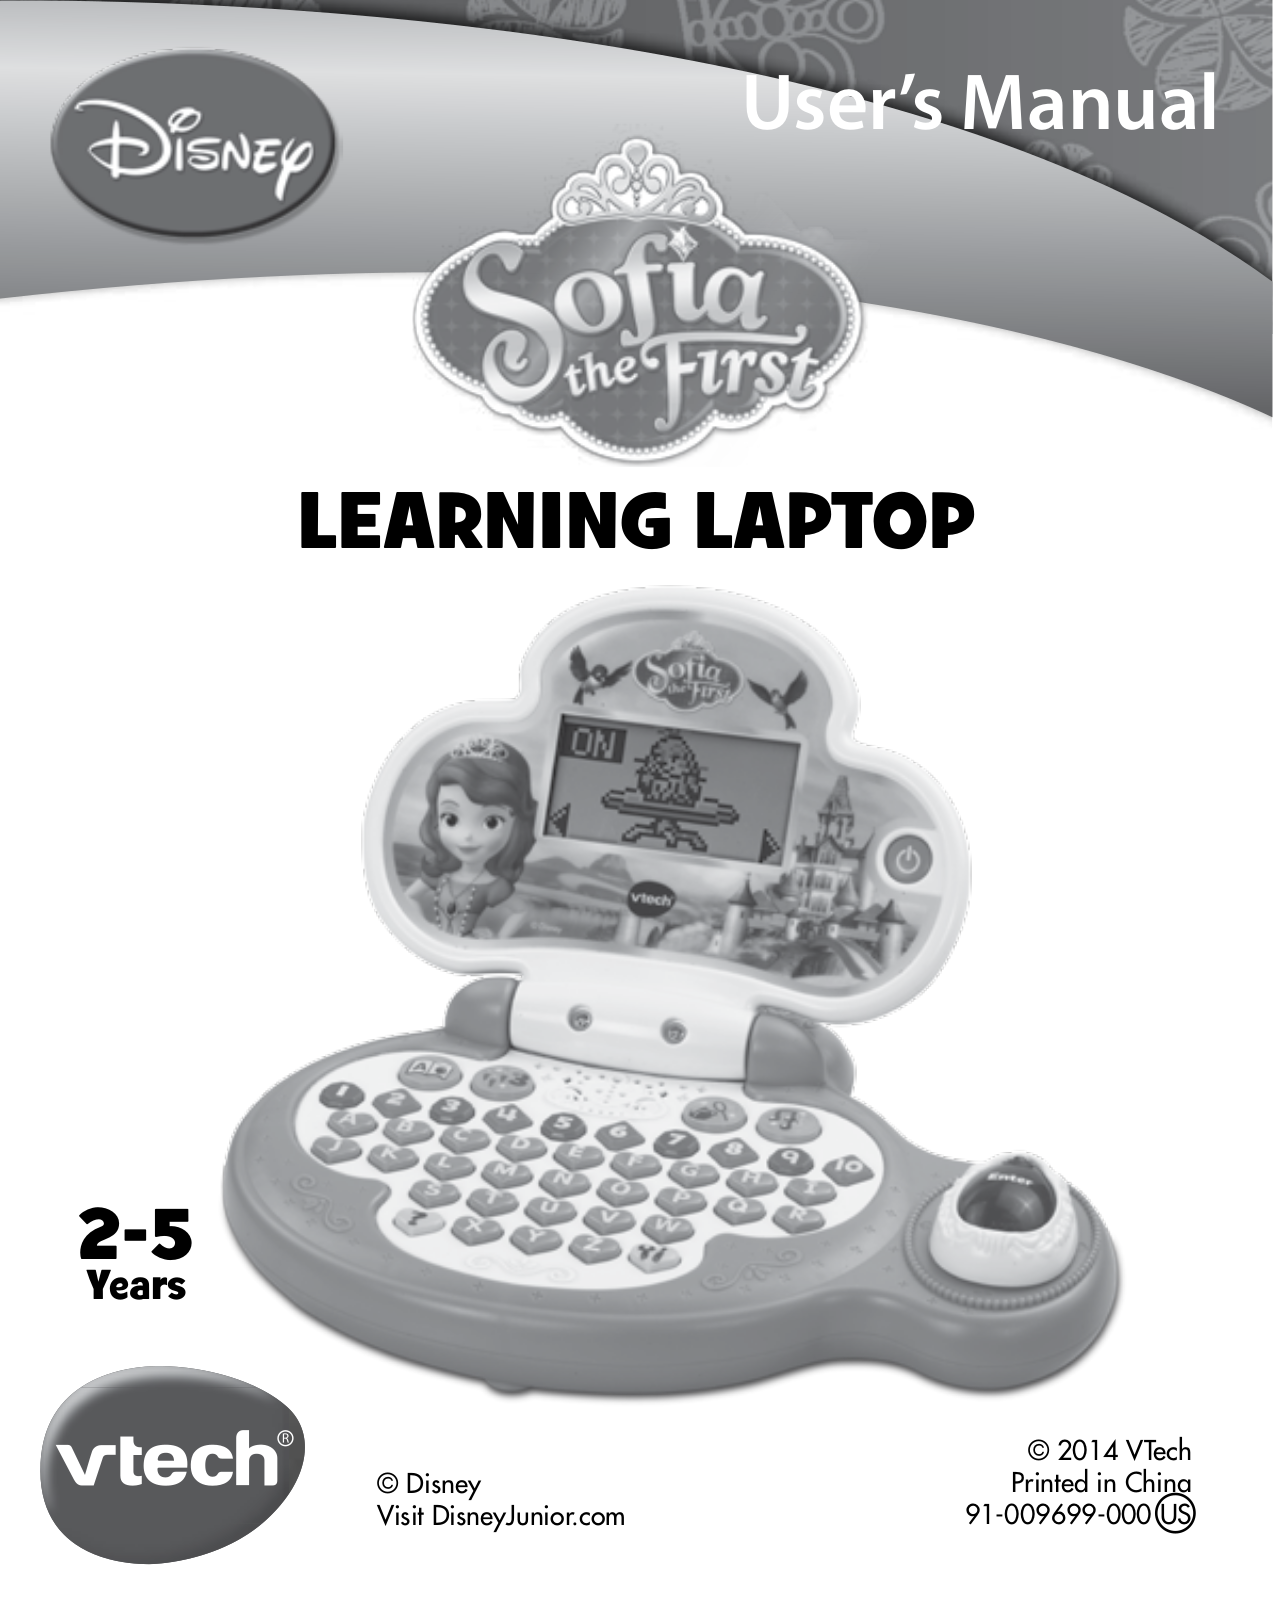 VTech Sofia the First Learning Laptop Owner's Manual